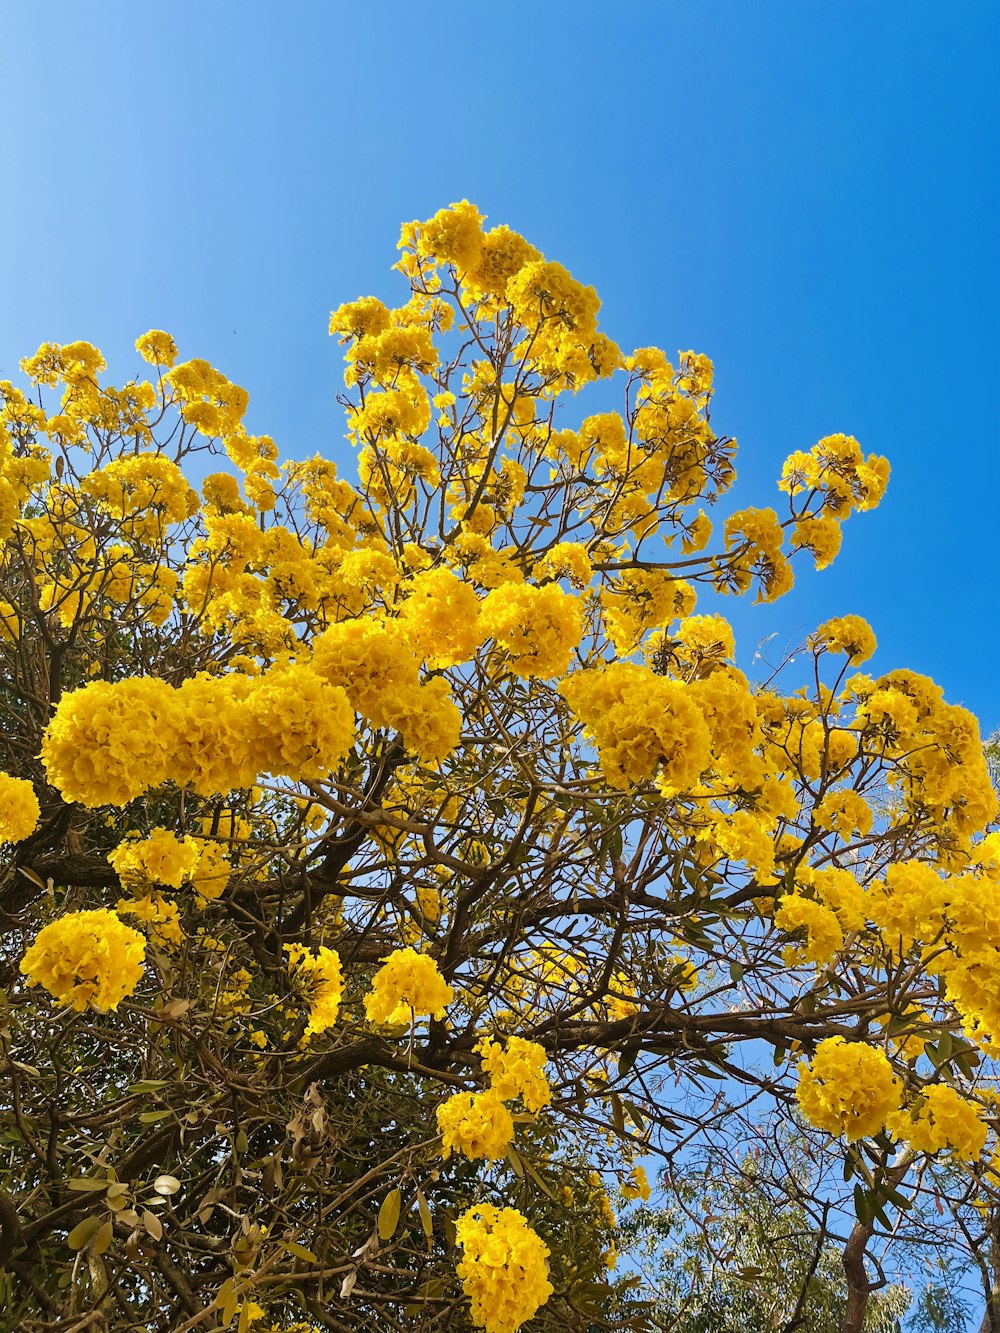 yellow flowers are blooming on a tree